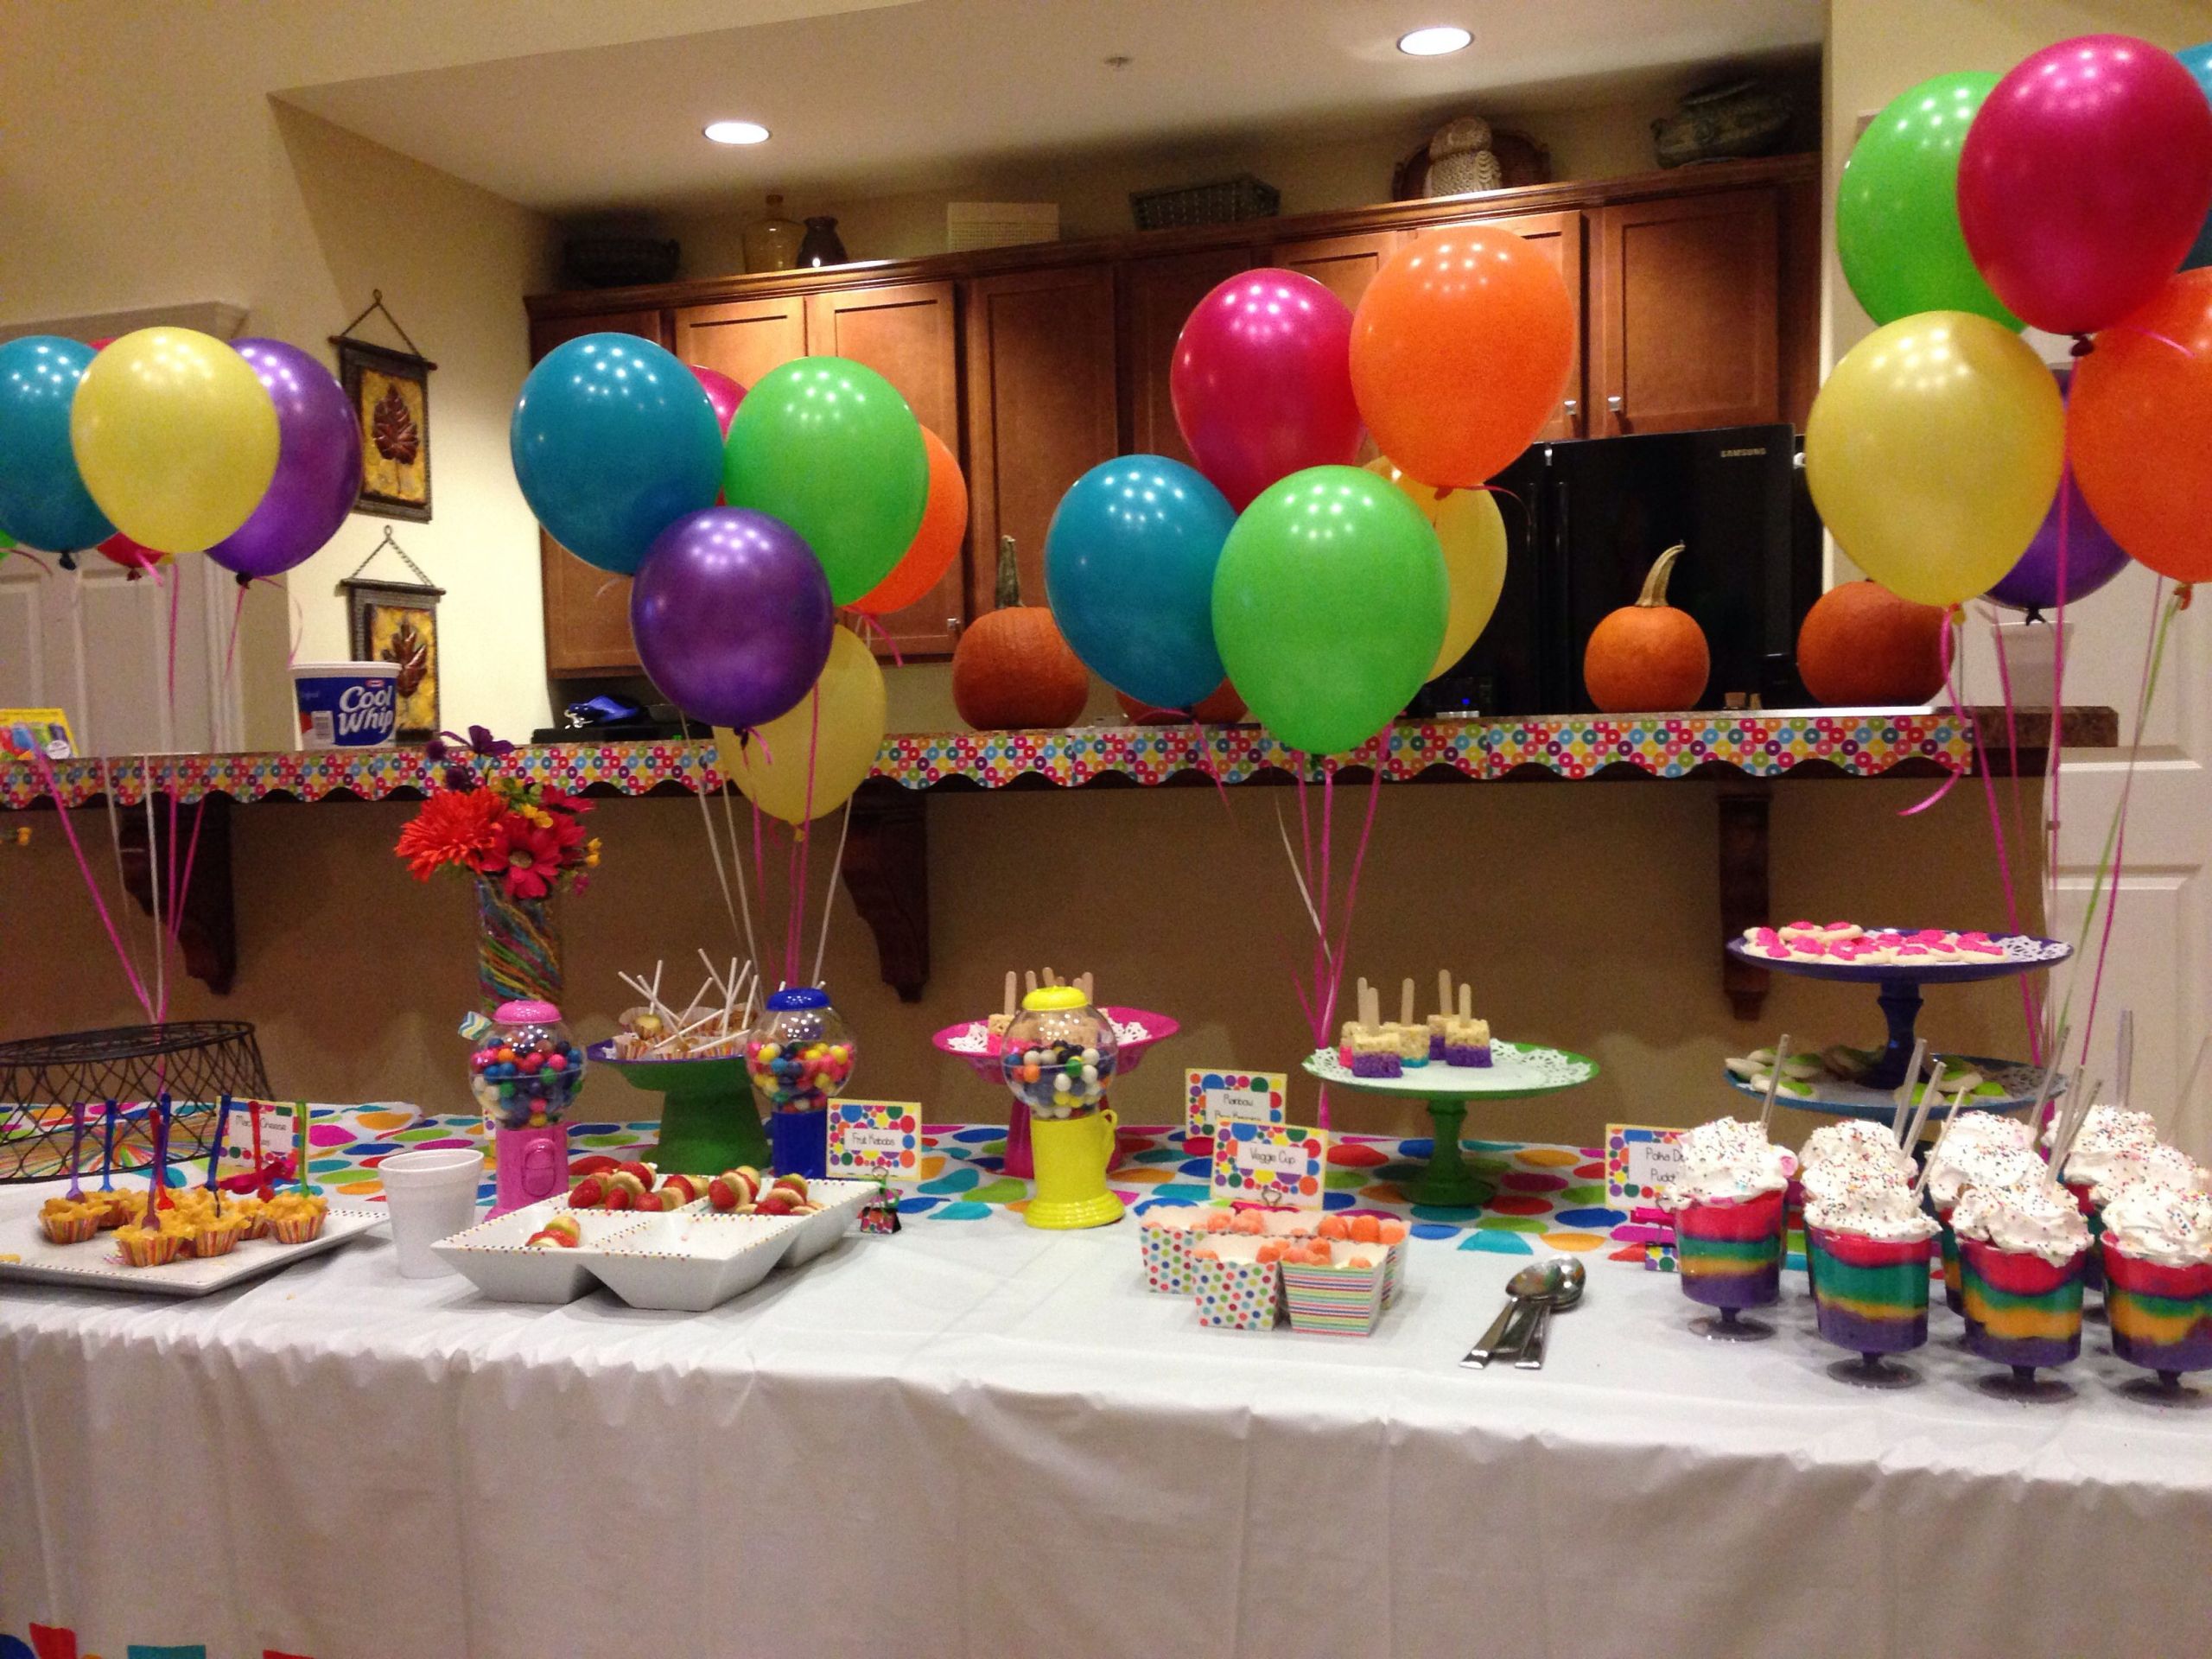 Four Year Old Birthday Party Ideas
 4 Year Old Birthday Party Ideas